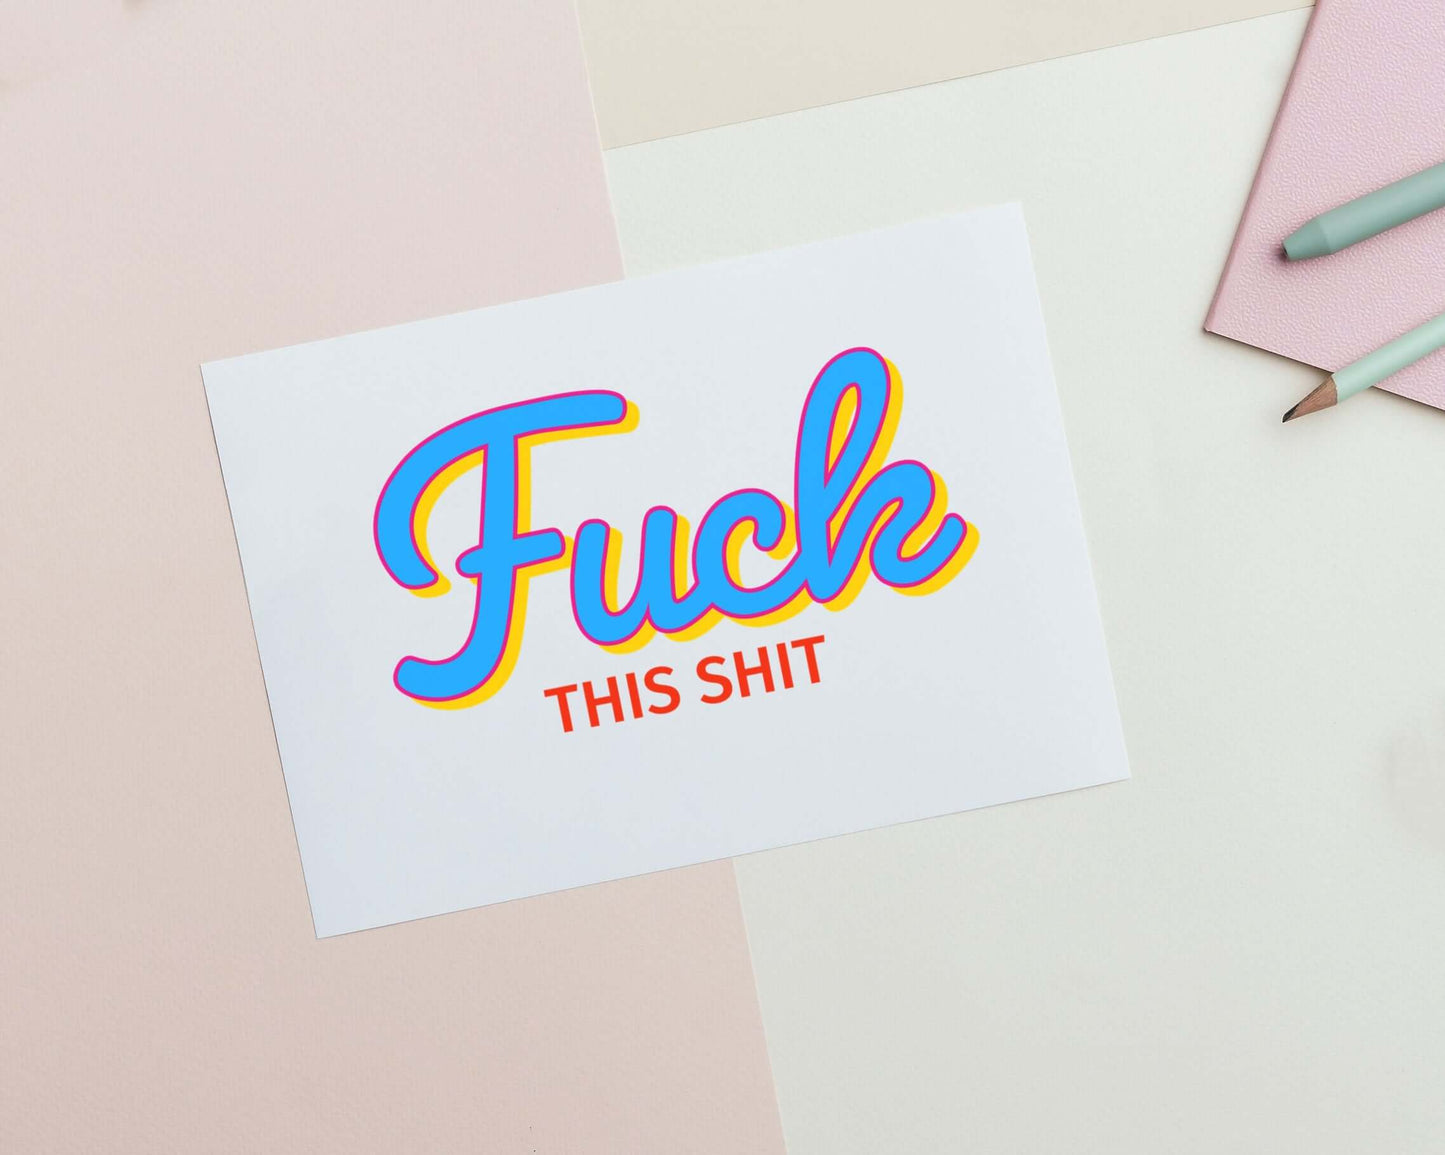 The Card Store UK's Fuck This Shit | Rude Funny Blank Card | Everyday Rude Swearing Colourful Greeting Card, General Cards for £3.50 each